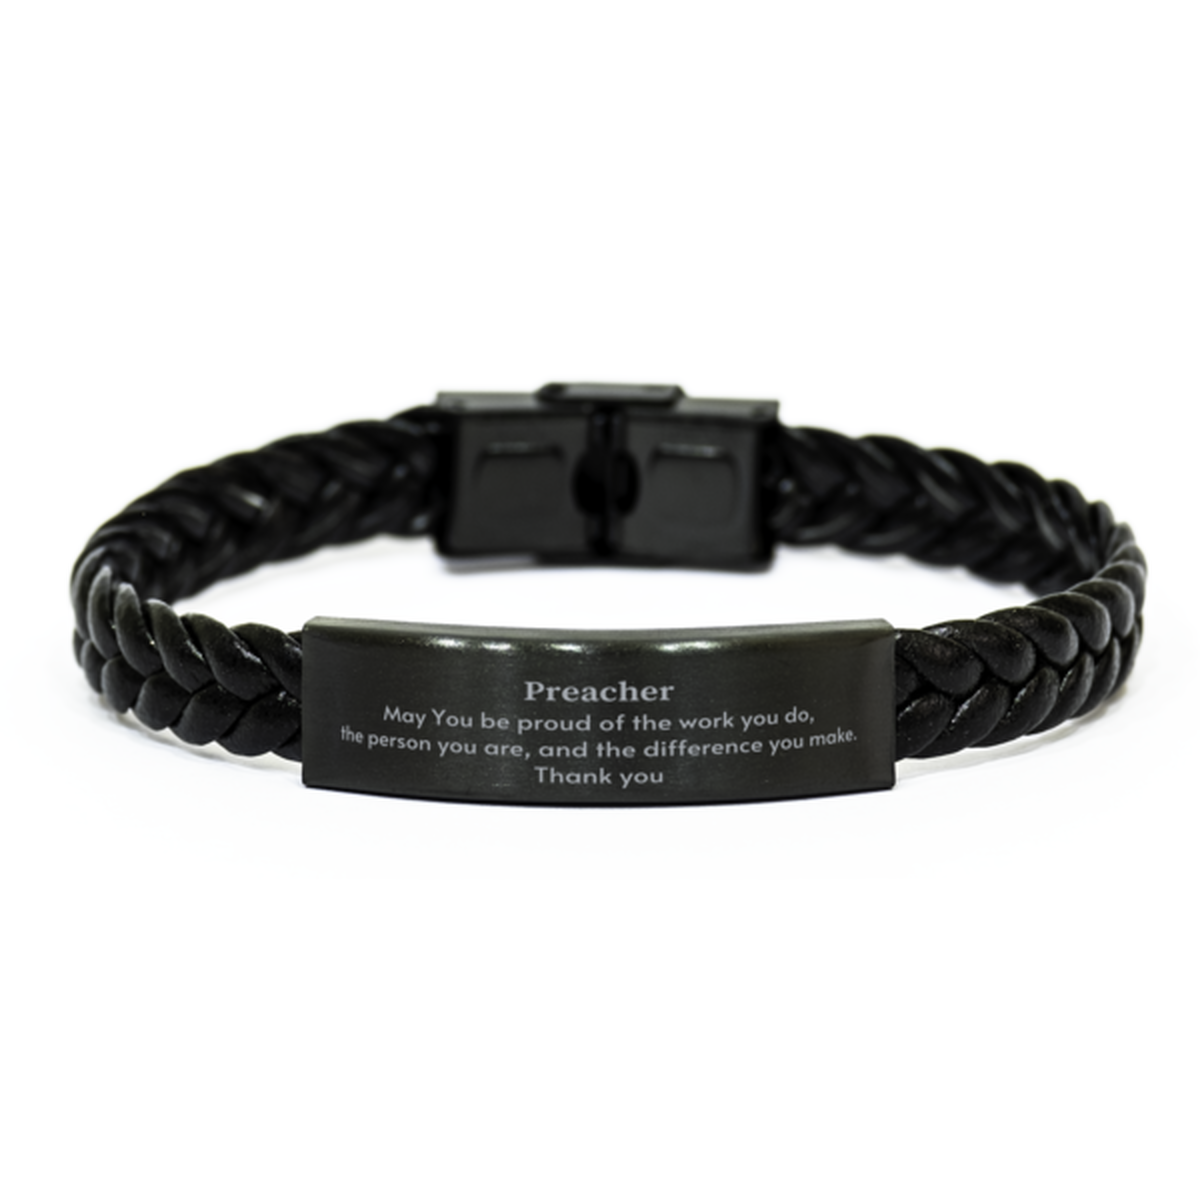 Heartwarming Braided Leather Bracelet Retirement Coworkers Gifts for Preacher, Preacher May You be proud of the work you do, the person you are Gifts for Boss Men Women Friends